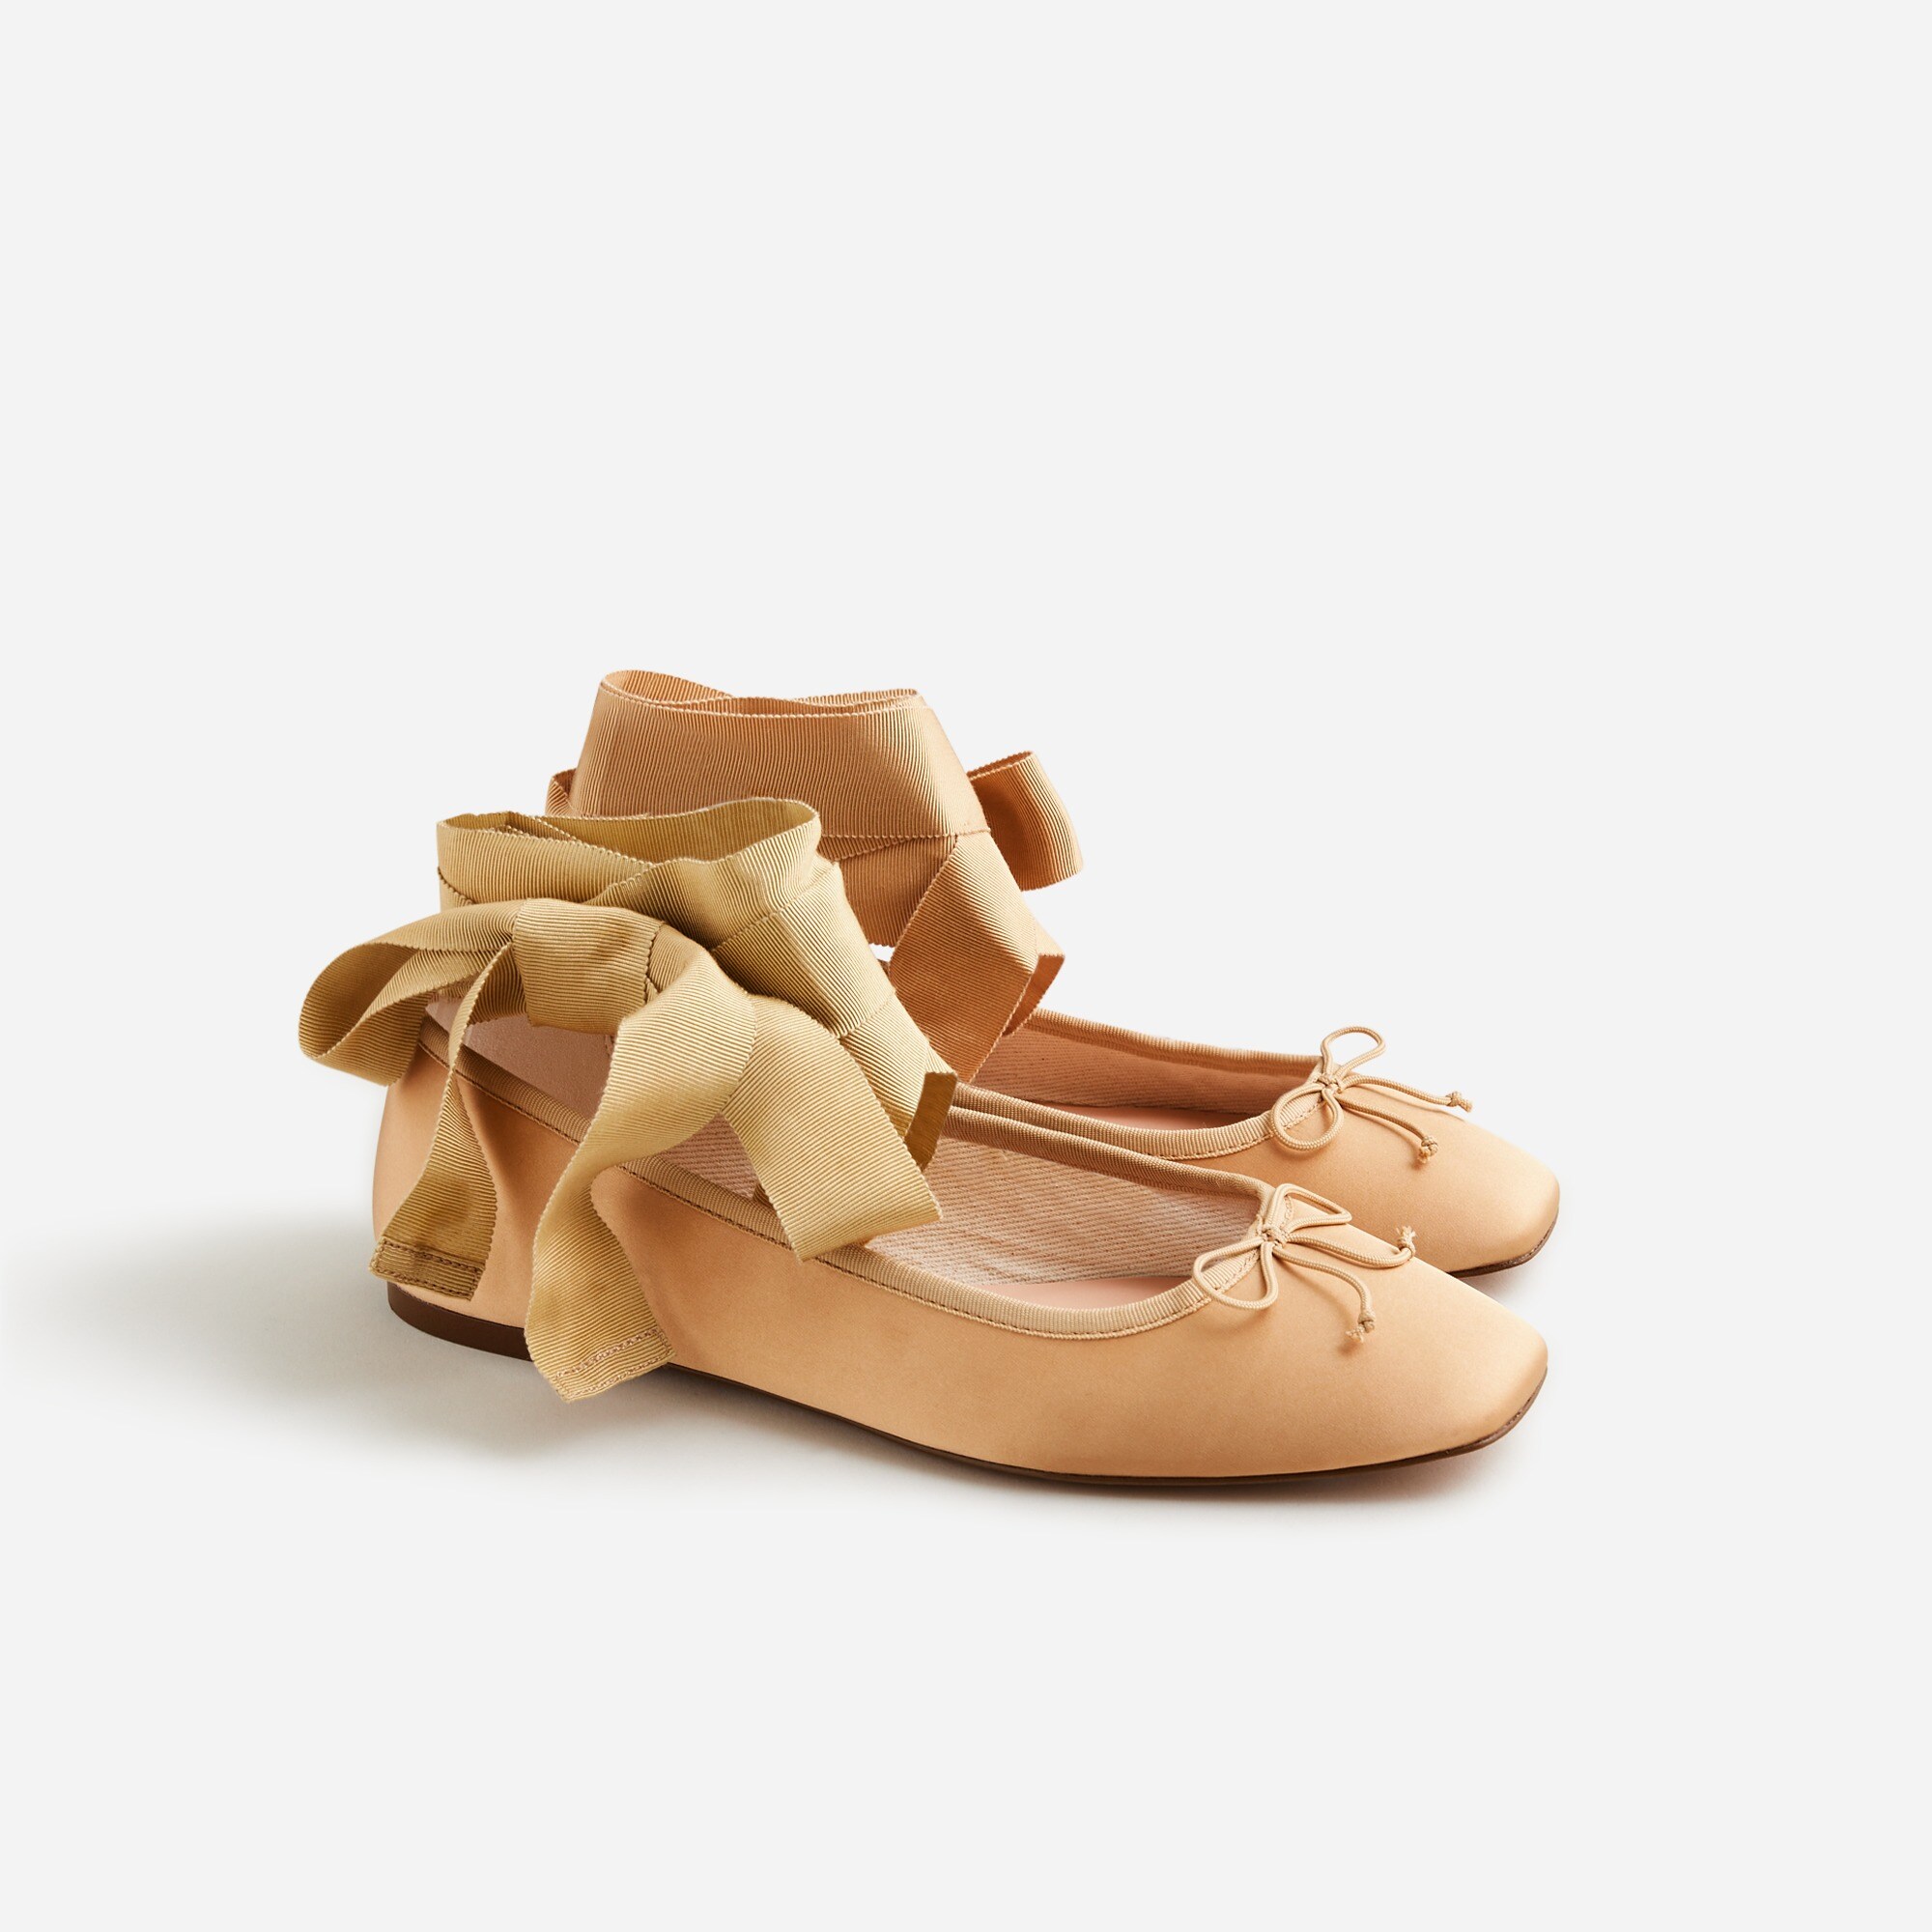  Quinn lace-up ballet flats in satin